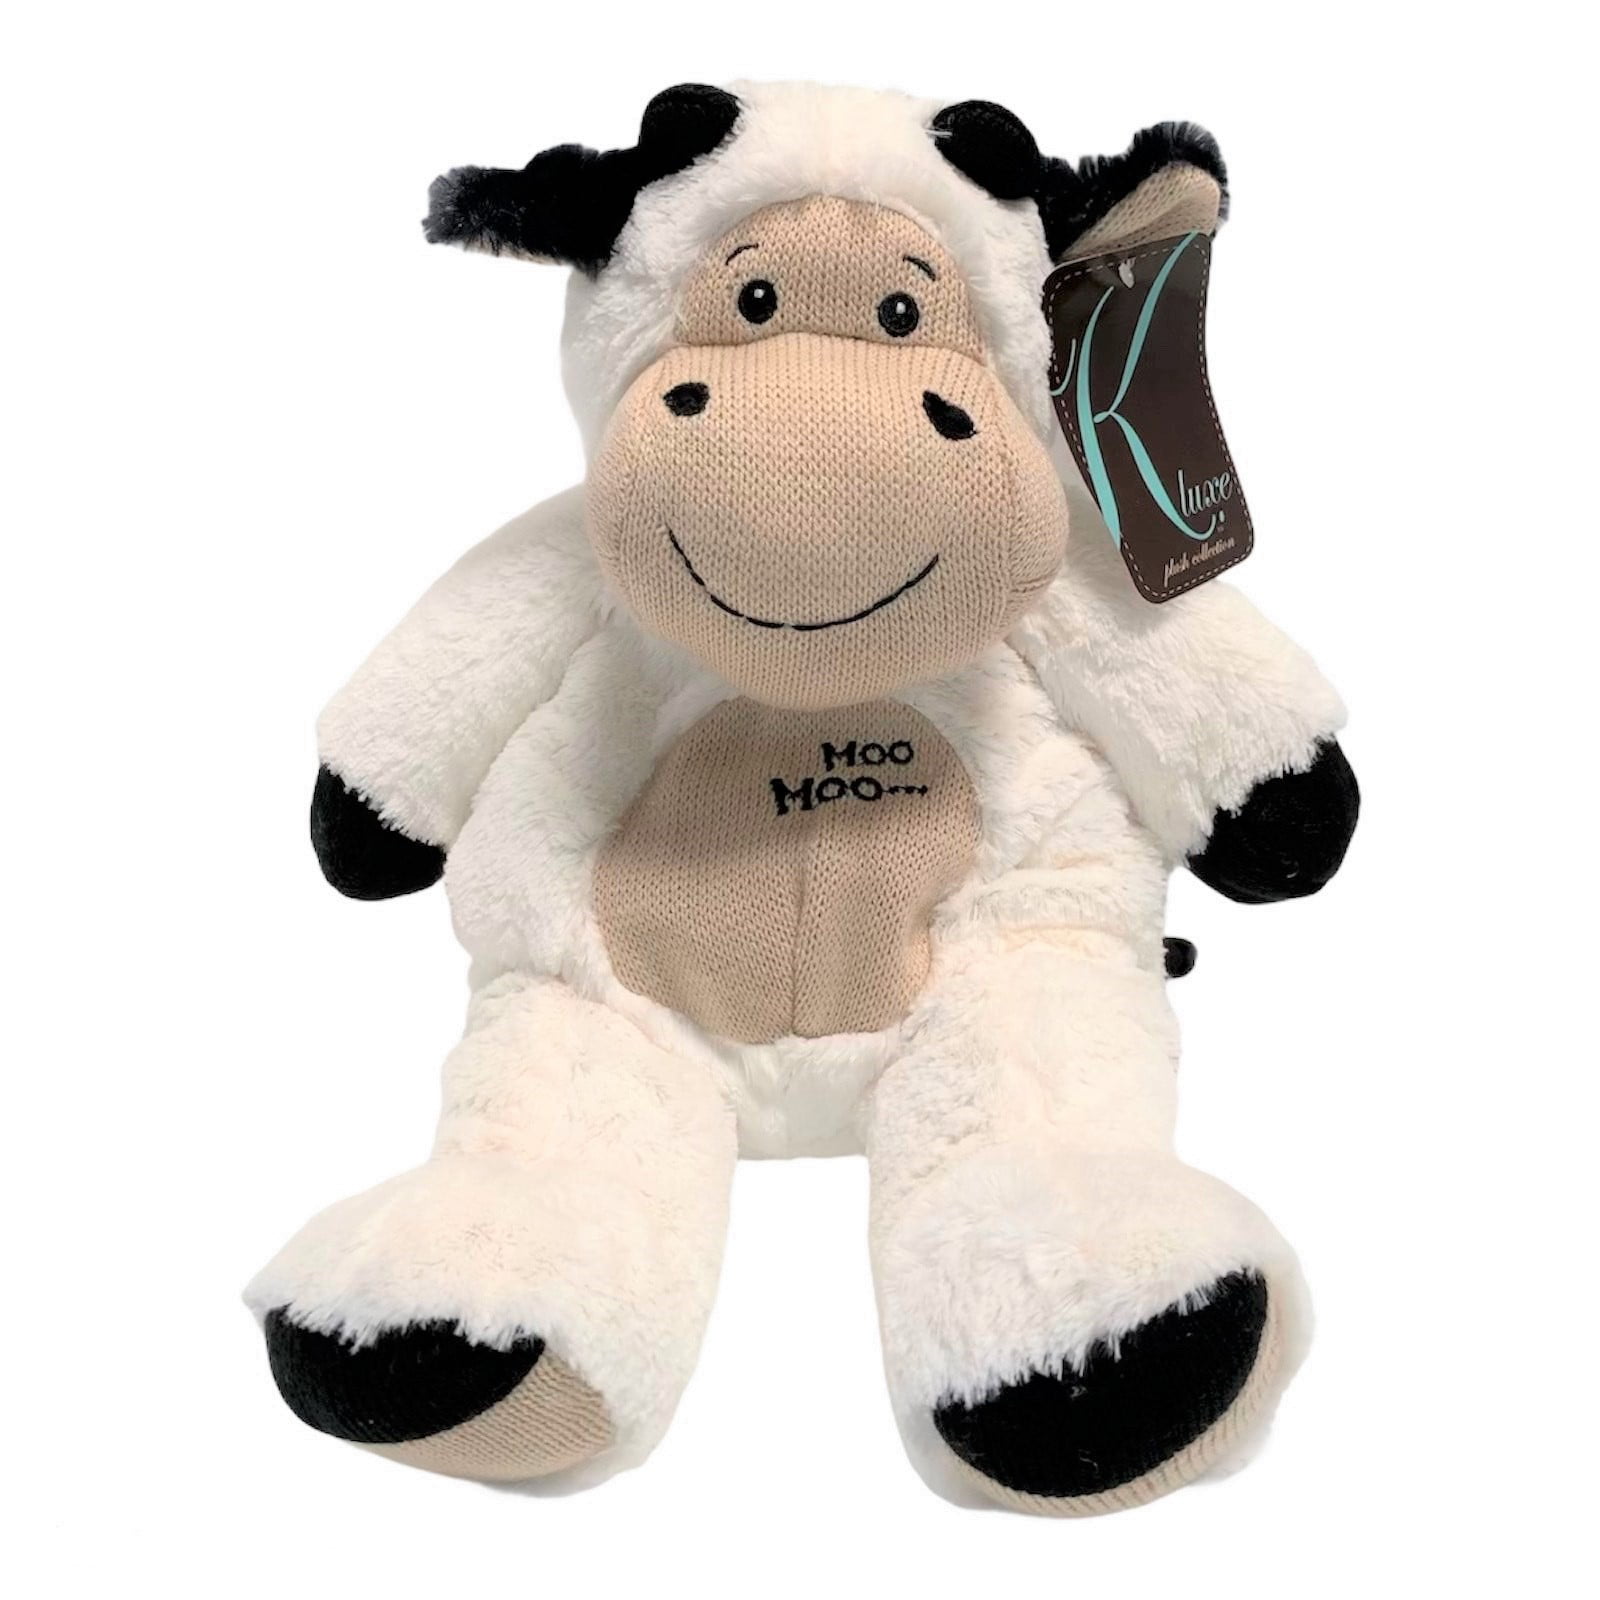 Cow Floppy with Embroidery 15 Inch Stuffed Plush Toy 